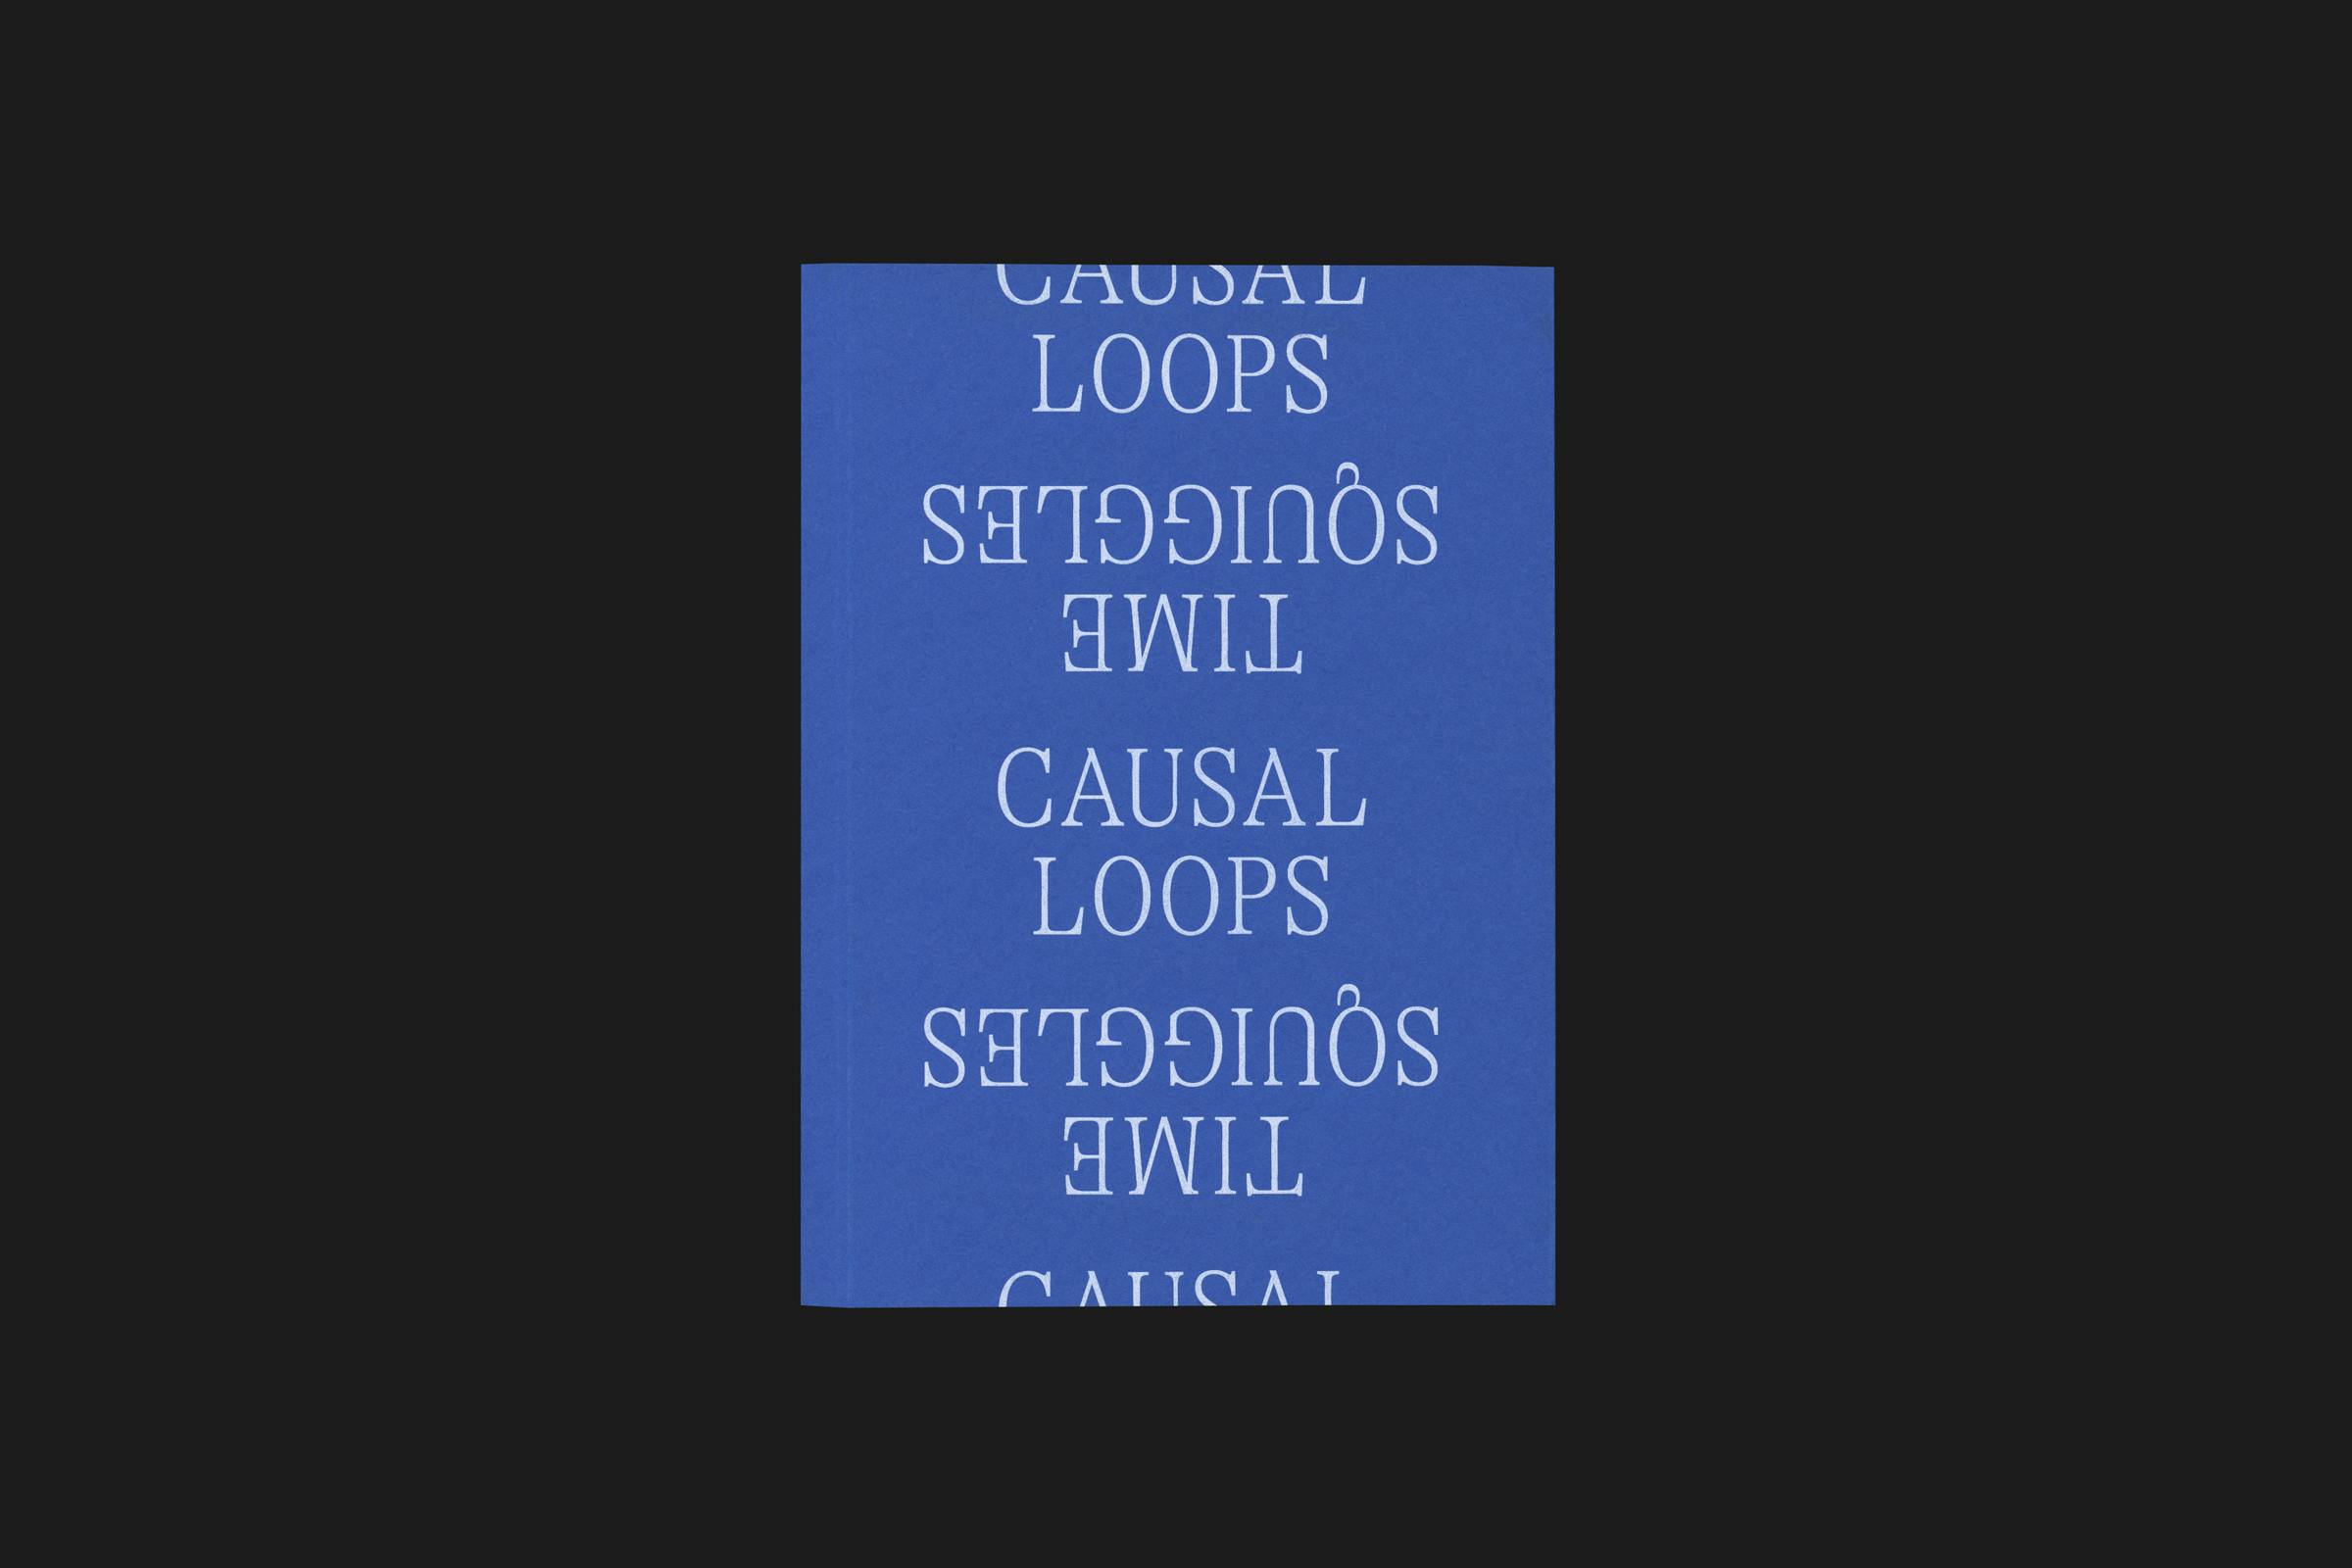 Fondazione Antonio Ratti, Causal Loops/Time Squiggles, Publication, Graphic Design by Wolfe Hall